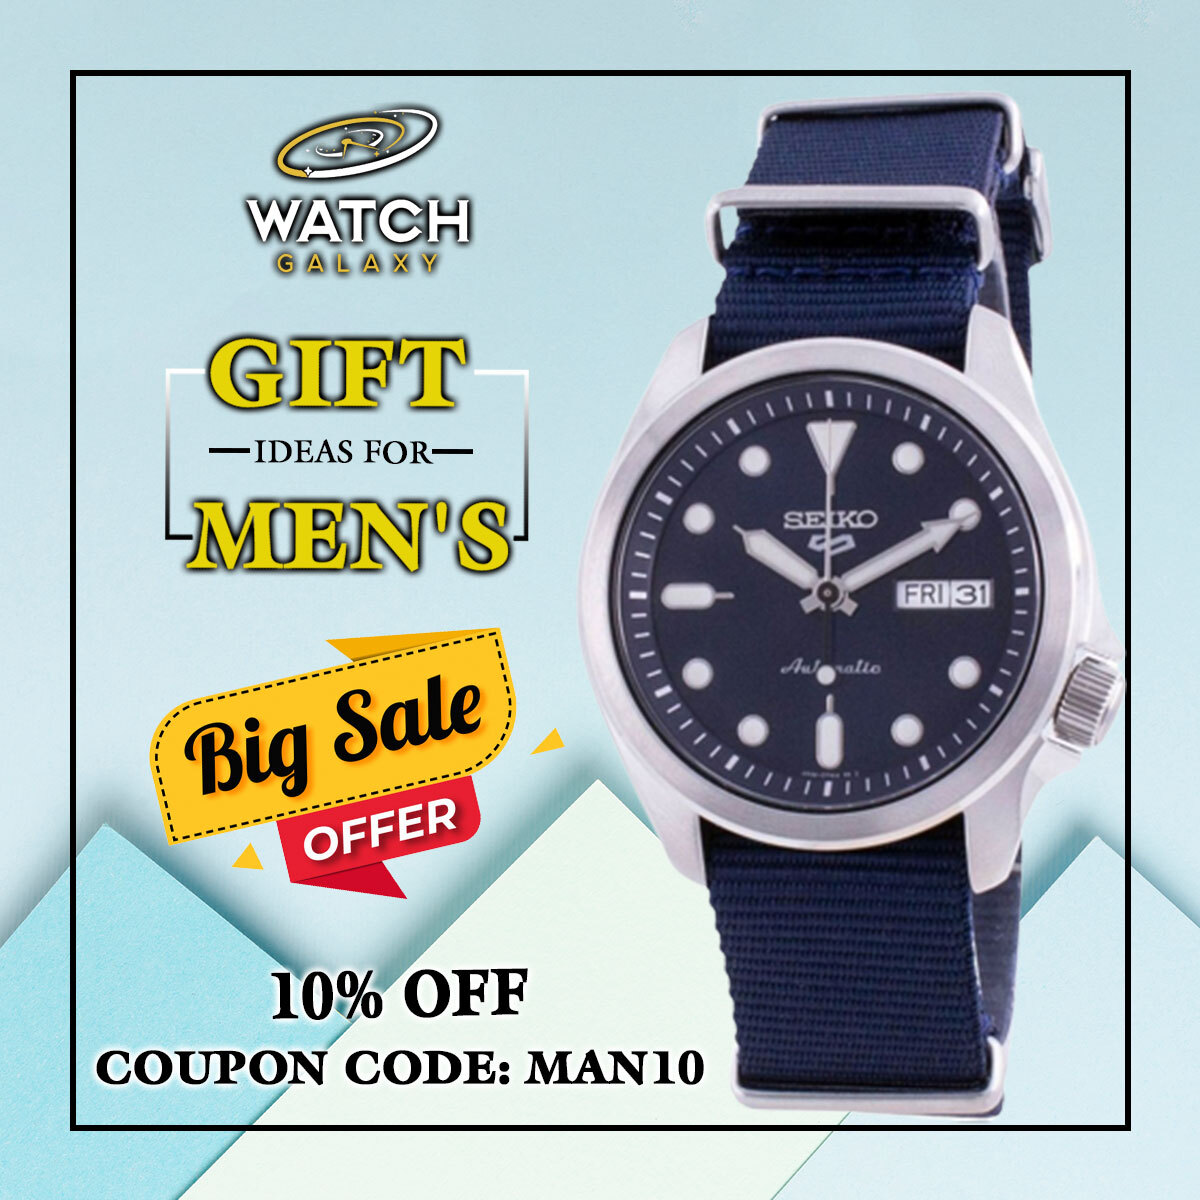 The Best Gift Idea For a Man🎁🎁

Get 10% off using coupon code MAN10

The Seiko 5 Sports Hardlex Crystal Automatic SRPE63K1 is a stylish and functional men's watch with a distinctive design. 

Buy now this Watch: bit.ly/47End1V

#watchaddiction #watchesoftheday #deals